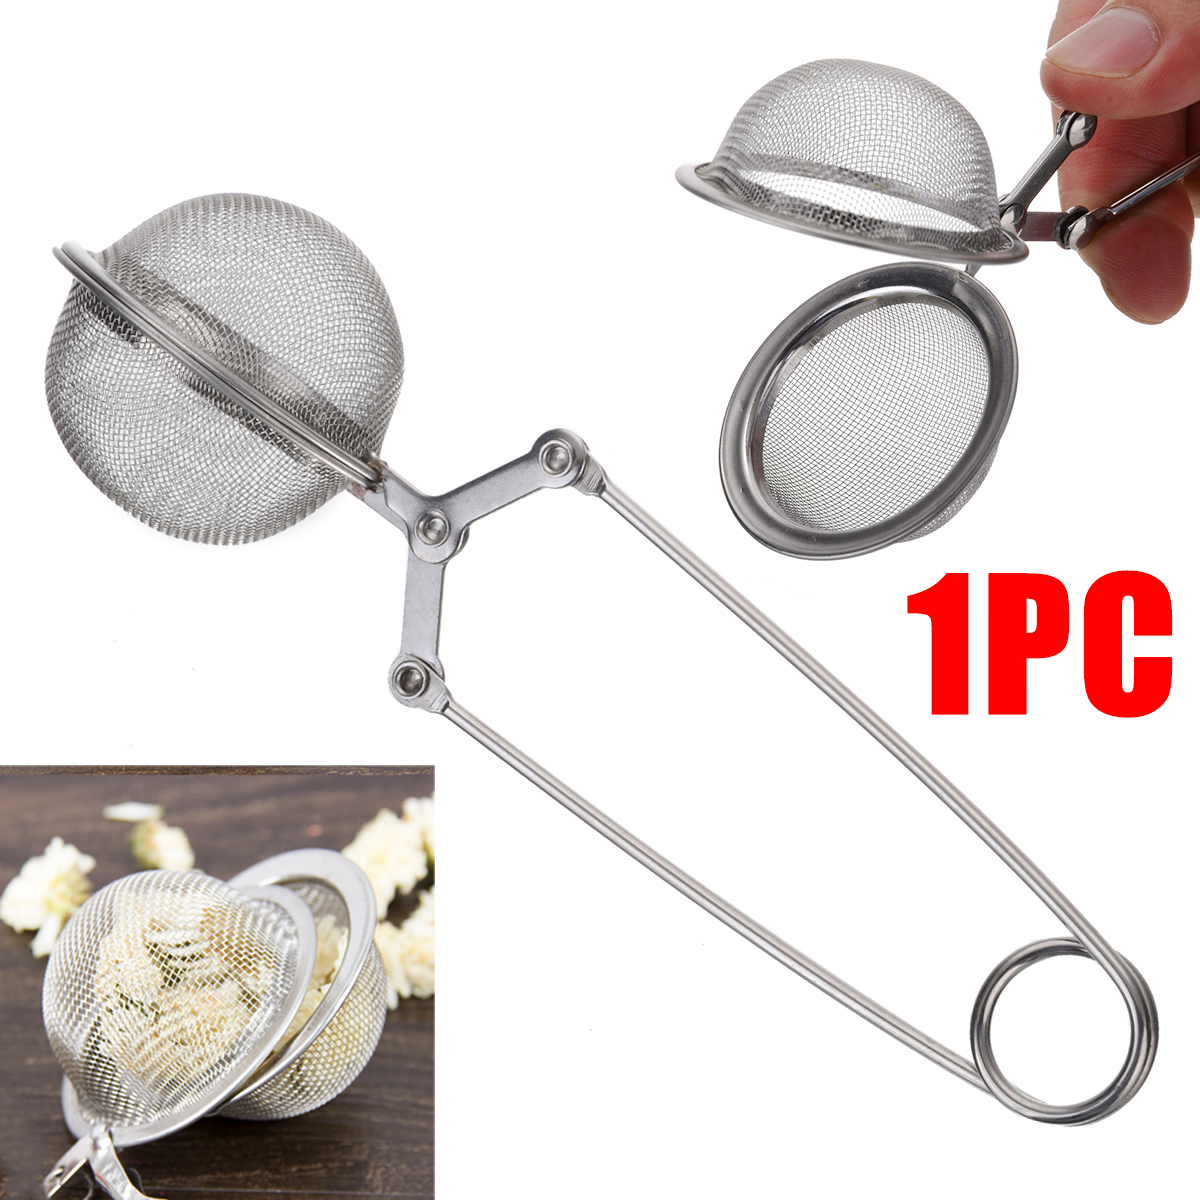 Mayitr 1pcs Stainless Steel Tea Infuser Mesh Spice Infuser Herb Tea Filter Strainer Handle Mesh Ball Spoon for Home Kitchen